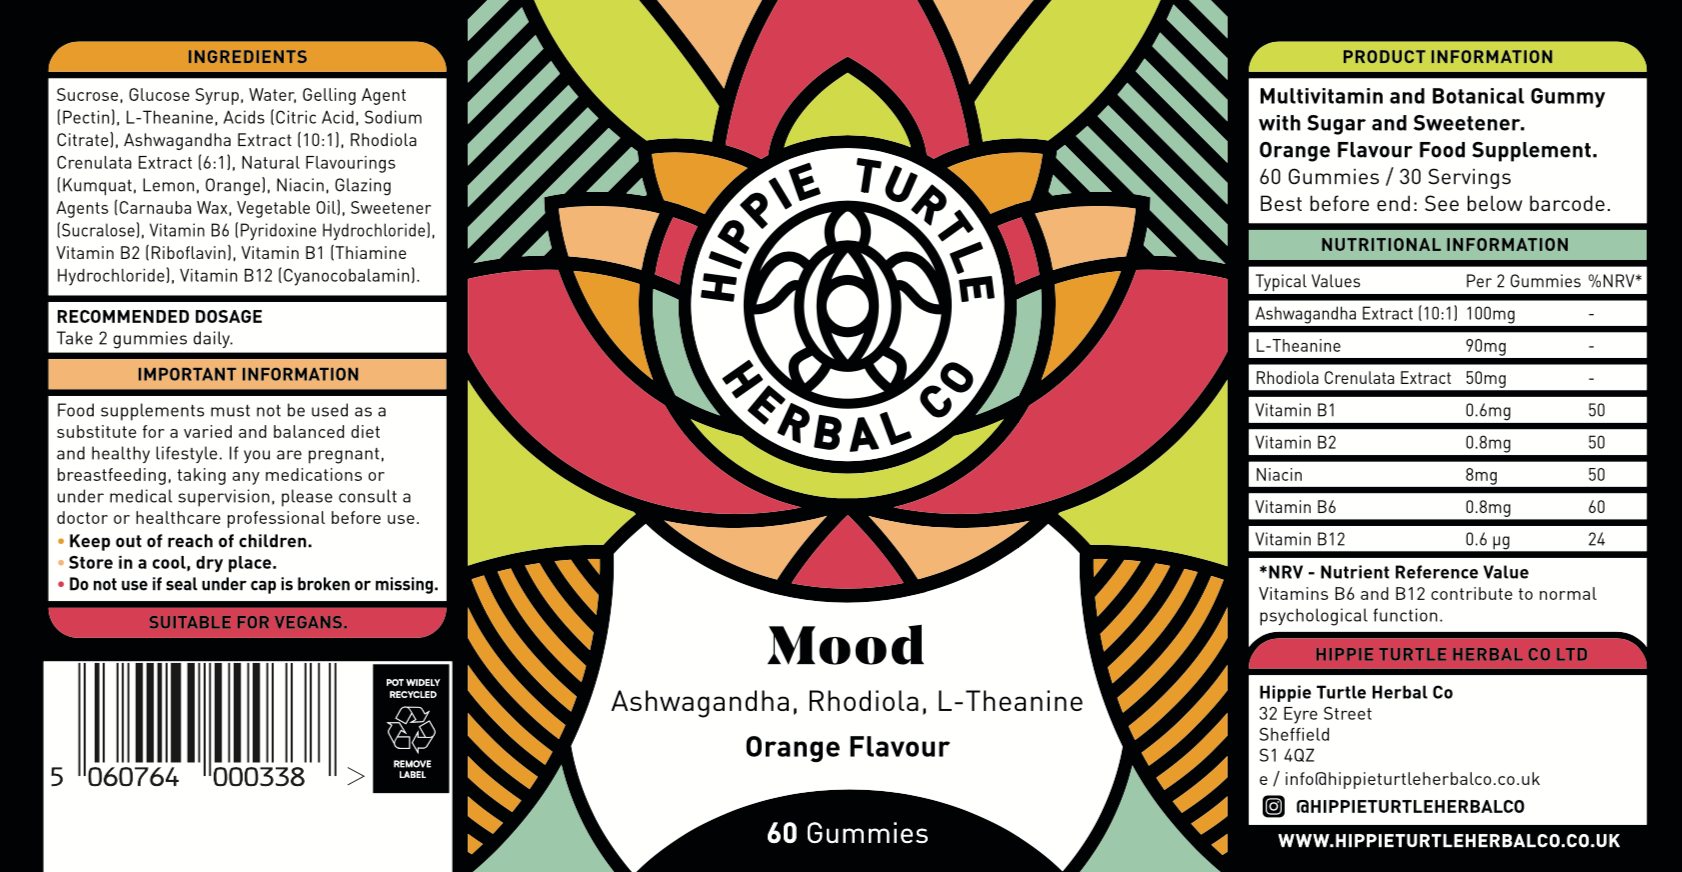 Hippie Turtle Herbal Co Mood gummies containing Ashwagandha, rhodiola, l theanine and b vitamins in great tasting supplement gummies for stress